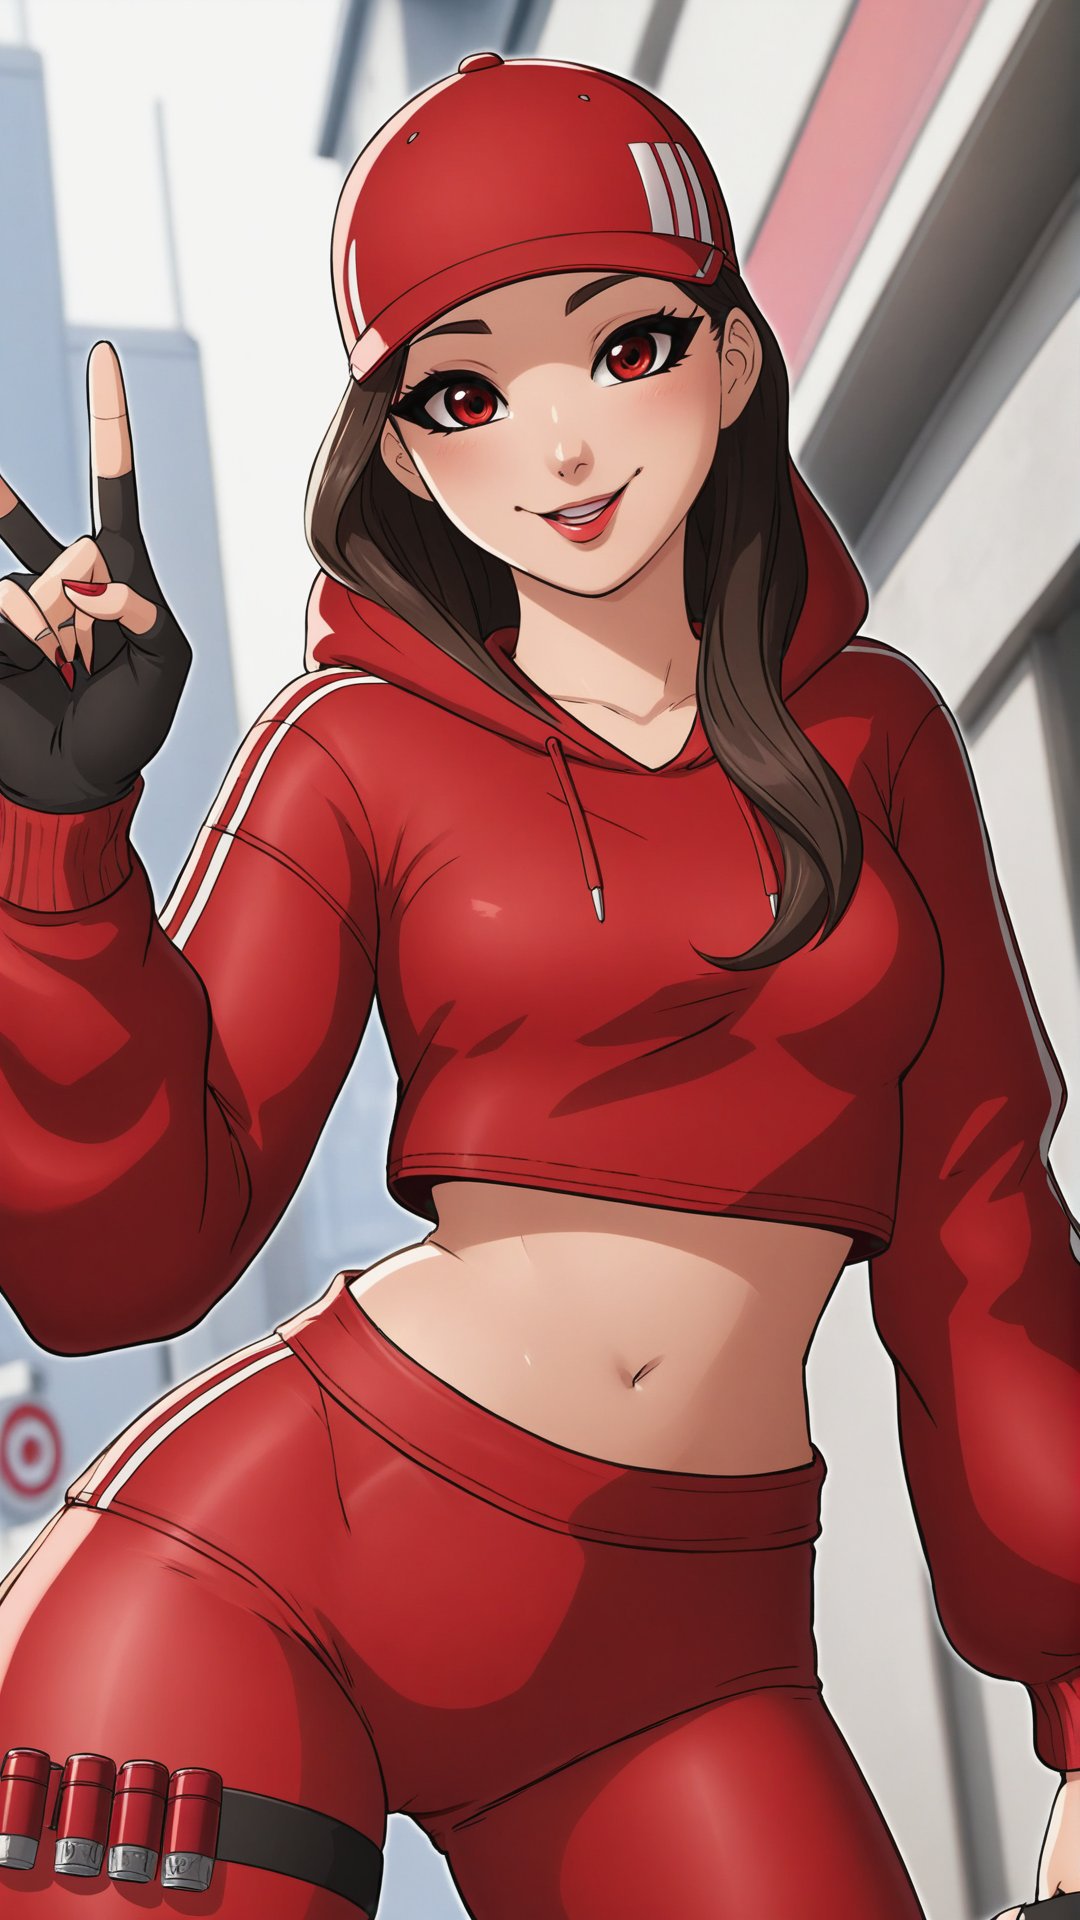 anime art of xrby,  wearing a red xxcc outfit,  raising her hand in a peace sign gesture,  stood in tokyo, <lora:EMS-58748-EMS:0.900000>